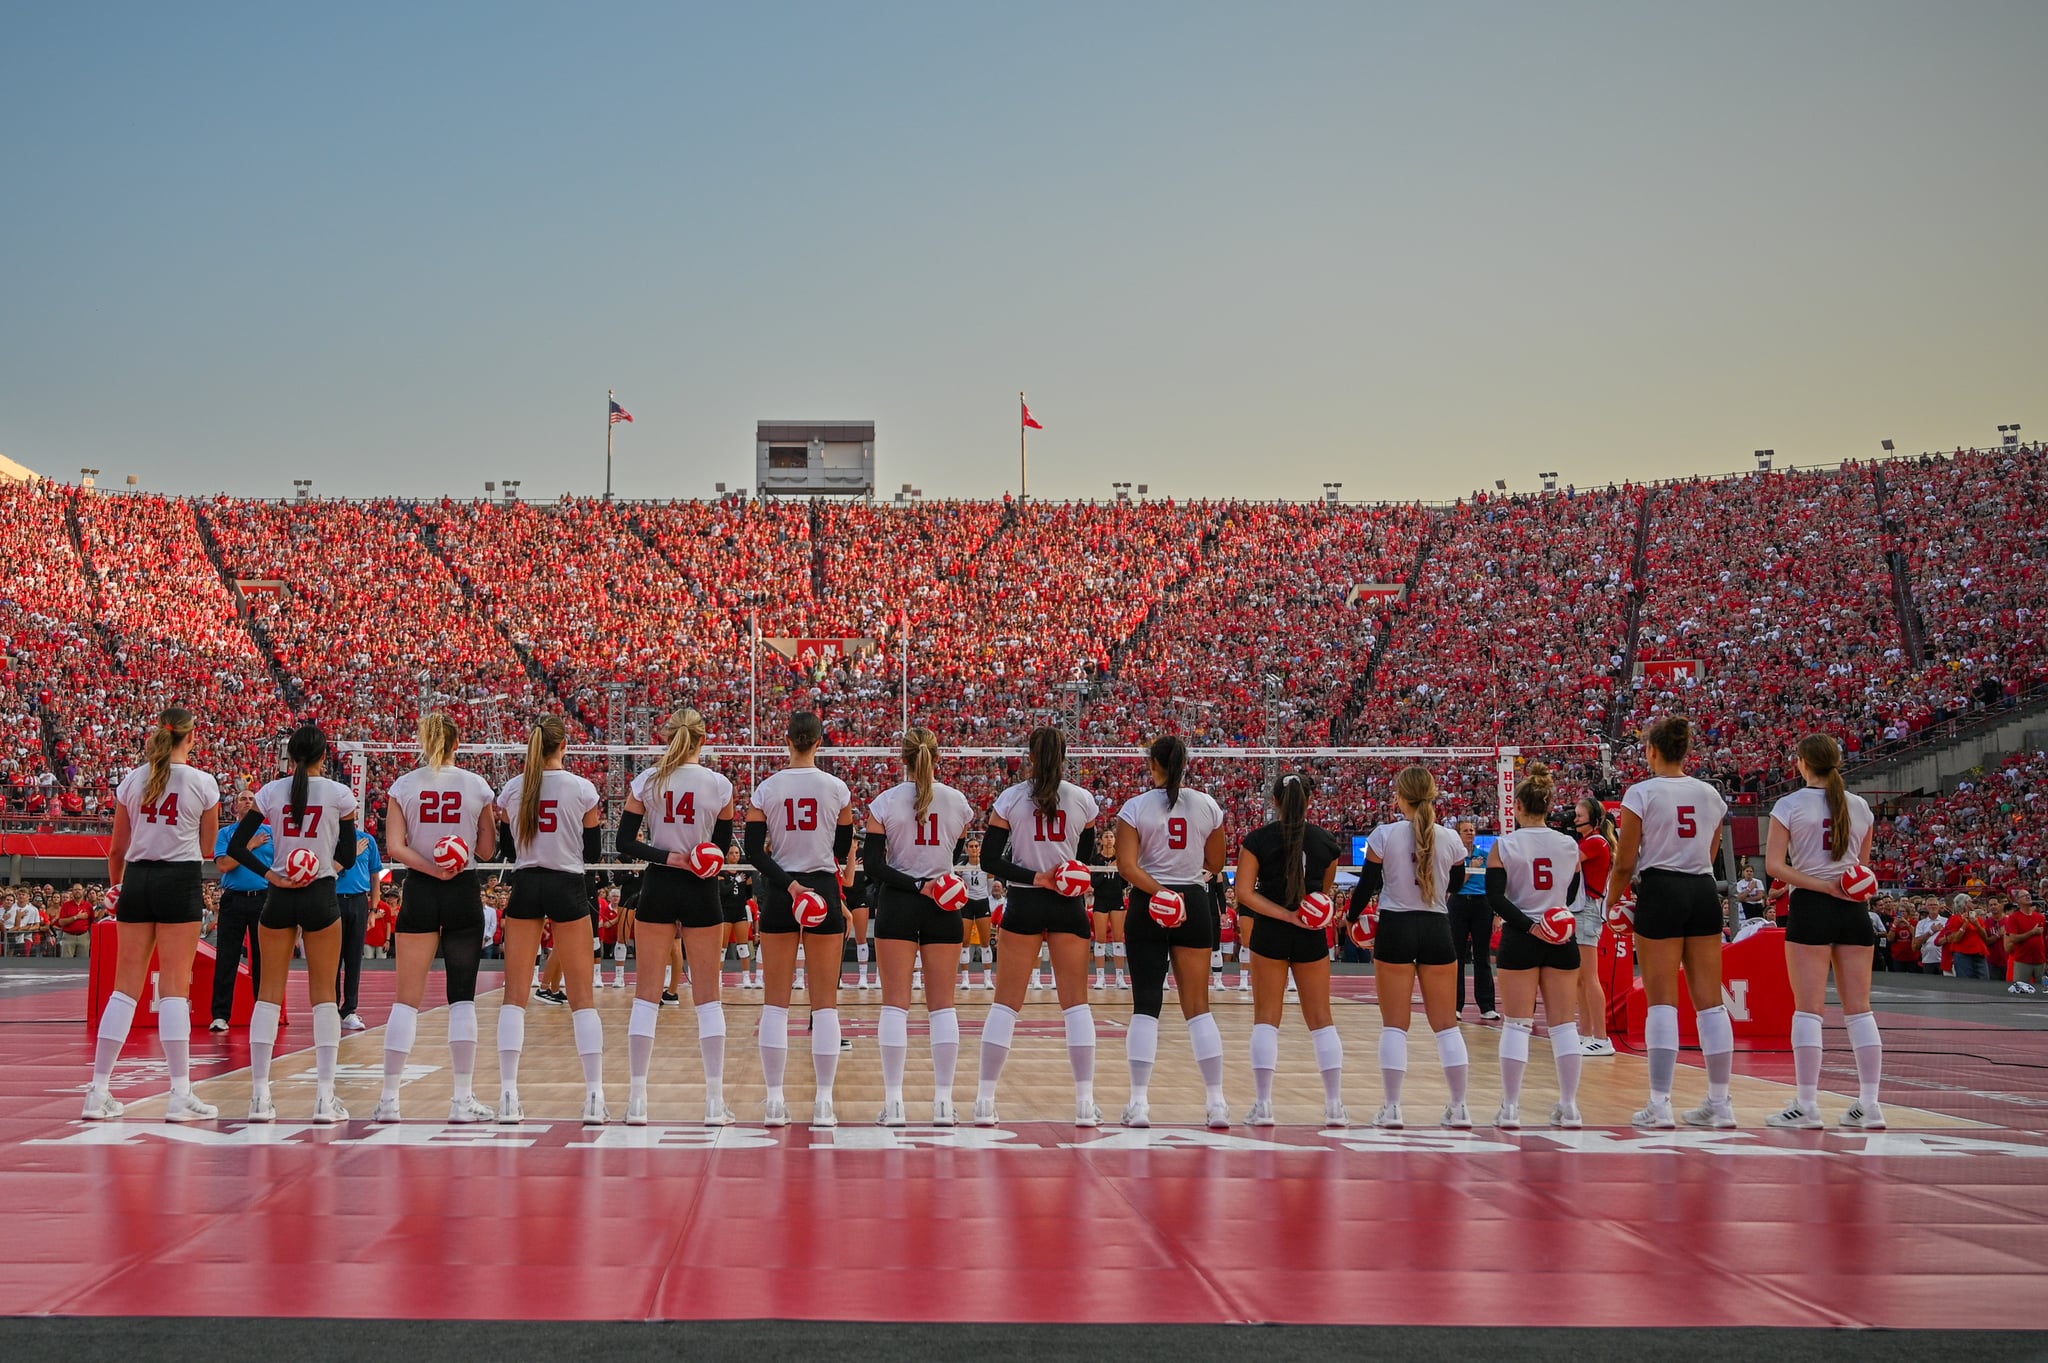 LINCOLN, NEBRASKA - AUGUST 30: The Nebraska Cornhuskers stand on the court during introductions before the game against the Omaha Mavericks at Memorial Stadium on August 30, 2023 in Lincoln, Nebraska. (Photo by Steven Branscombe/Getty Images)